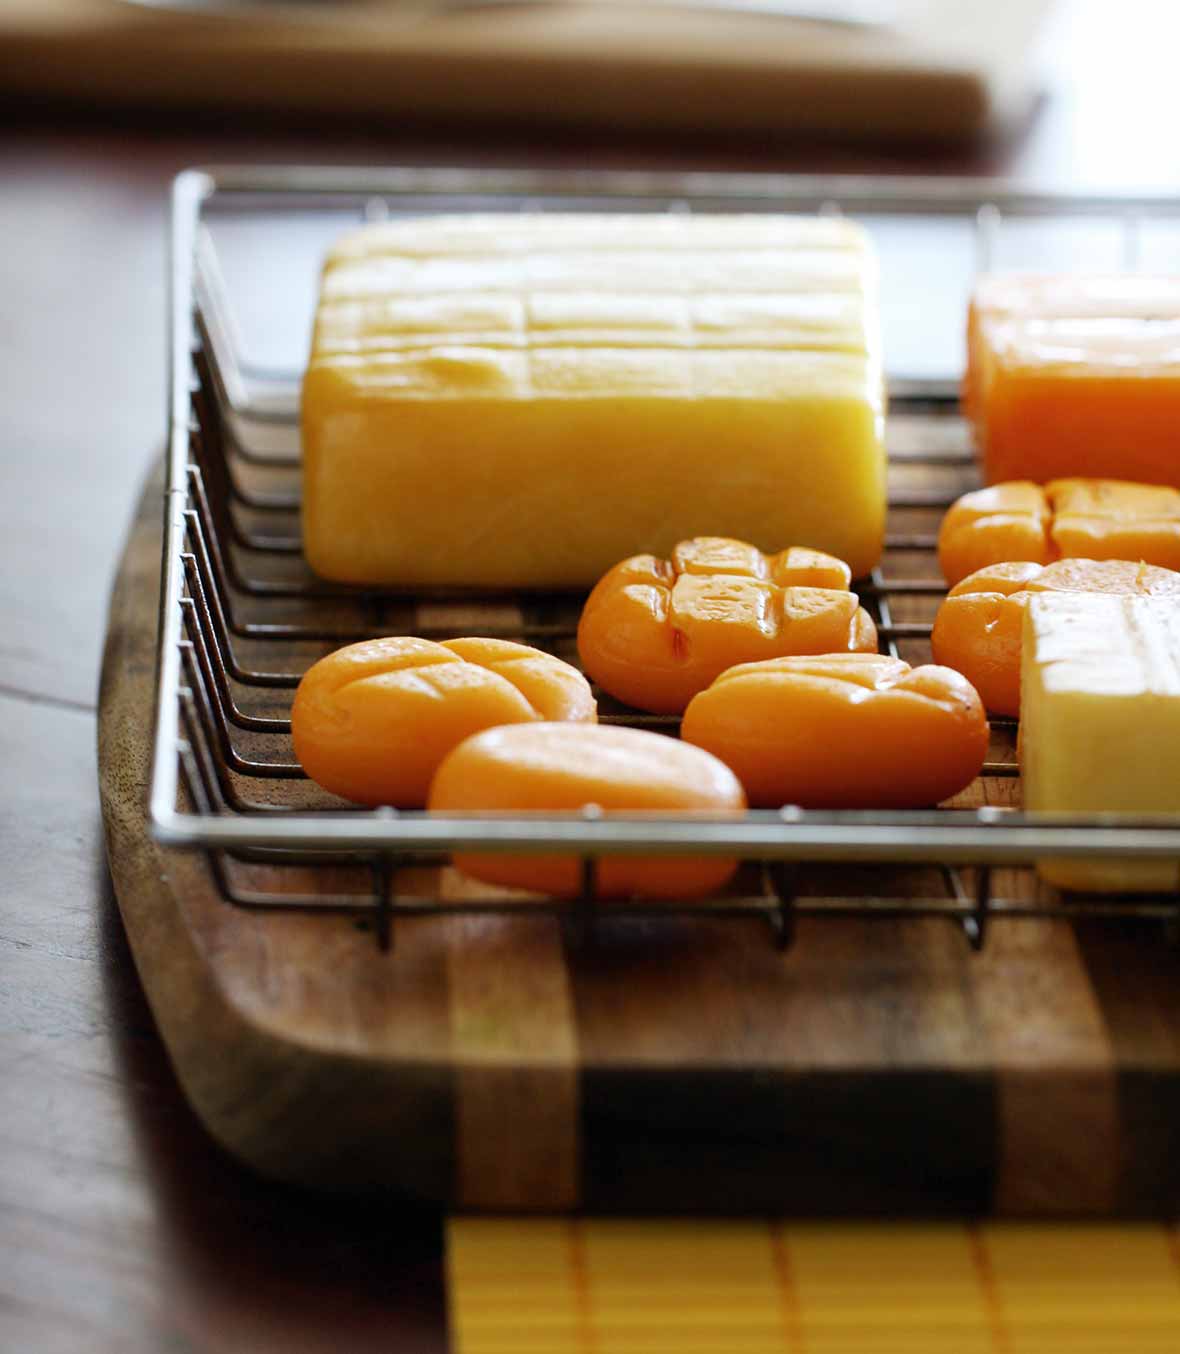 A wire basket on a wood cutting board containing several types of cheese, including smoked cheddar cheese.